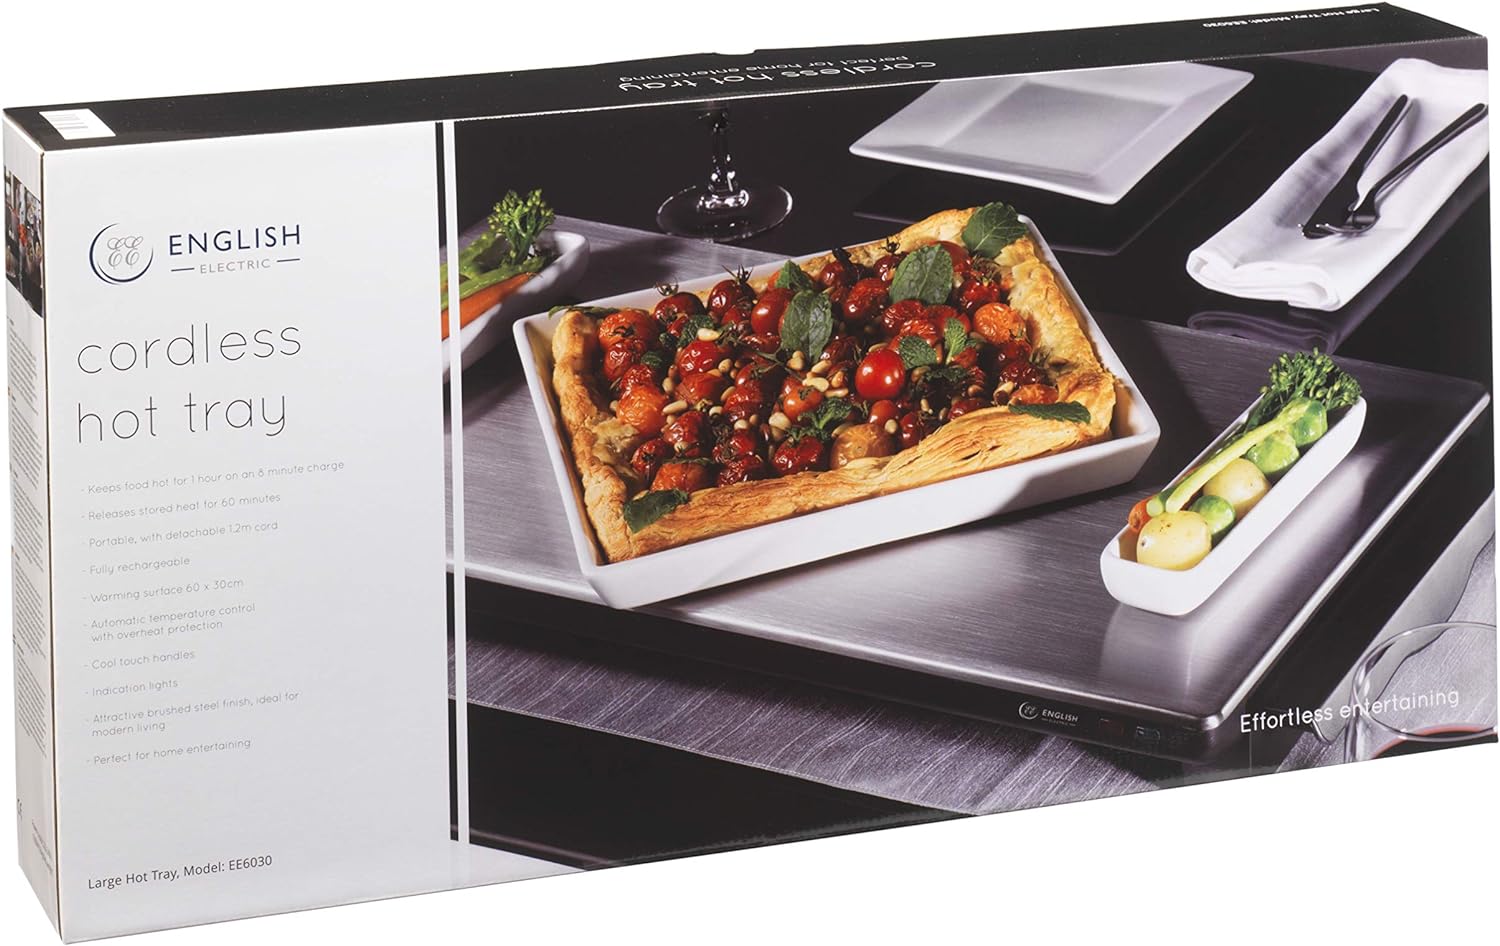 English Electric Large Cordless Hot Tray EE6030 Plate and Food Warmer